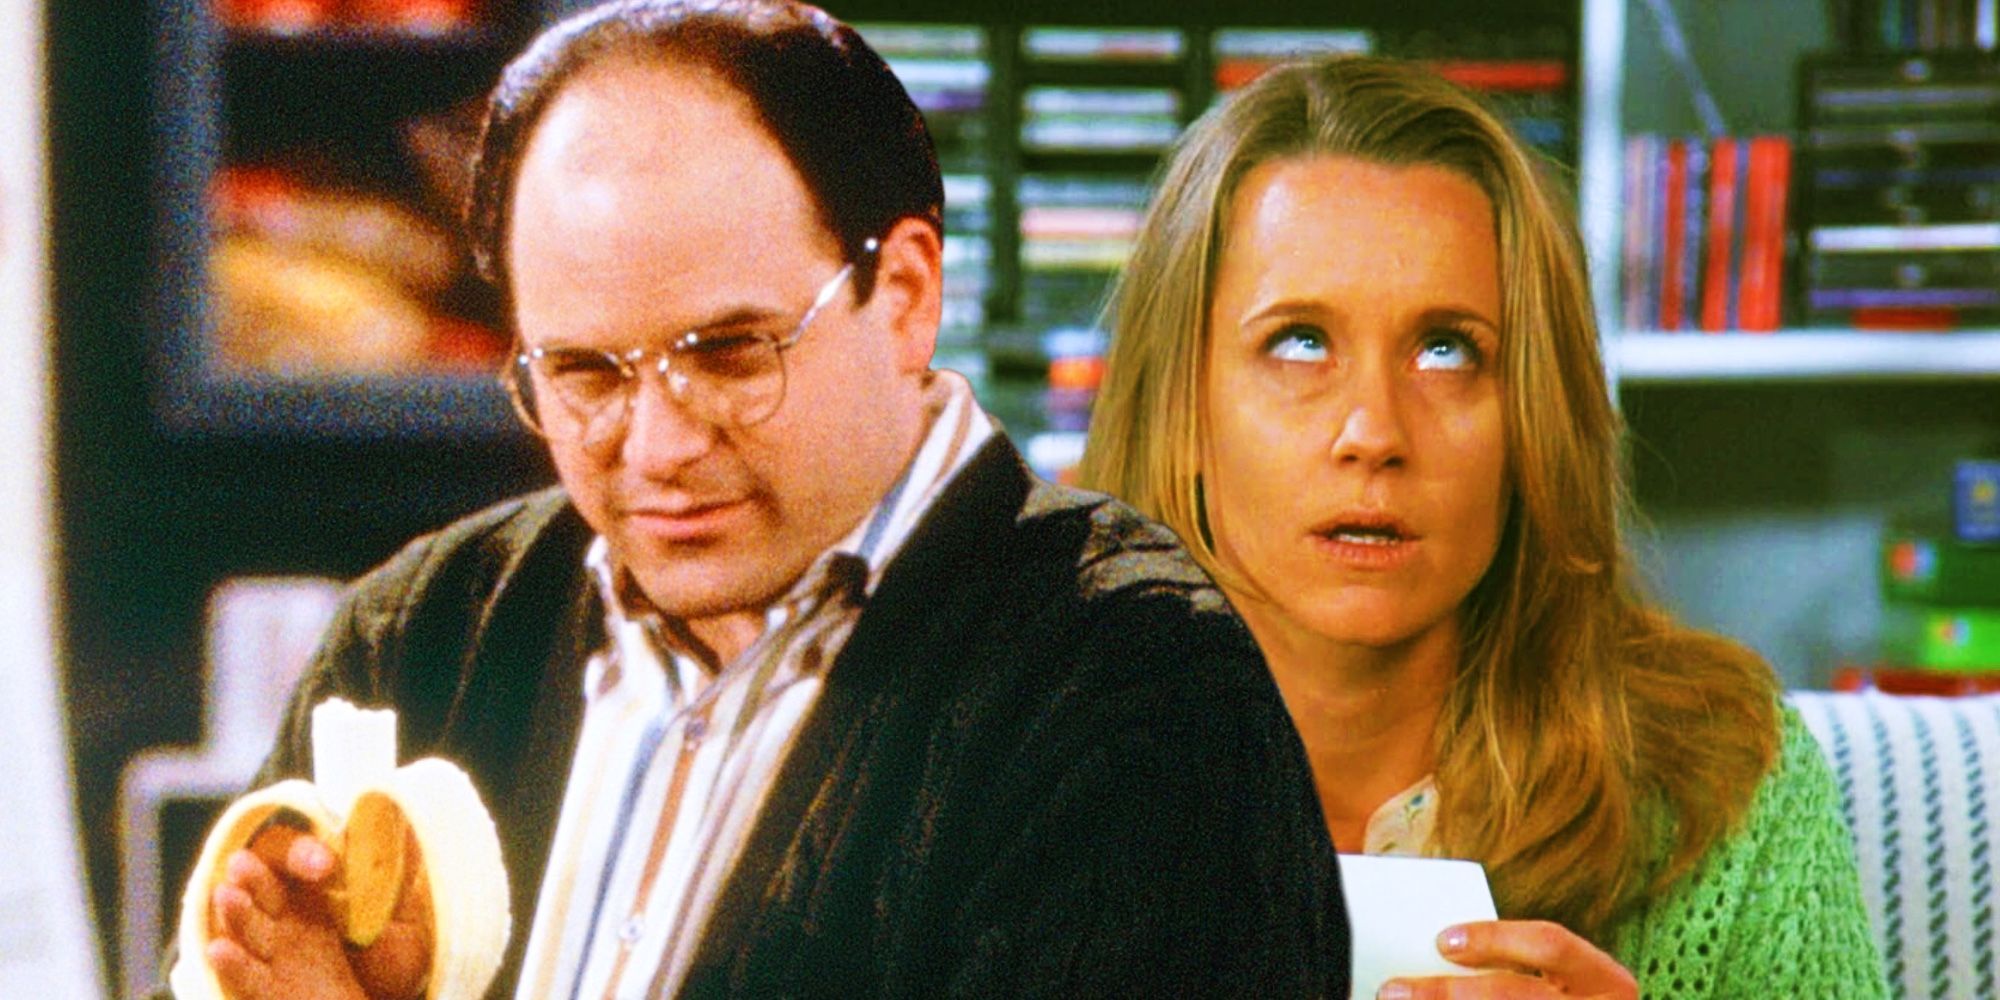 George and Susan in Seinfeld